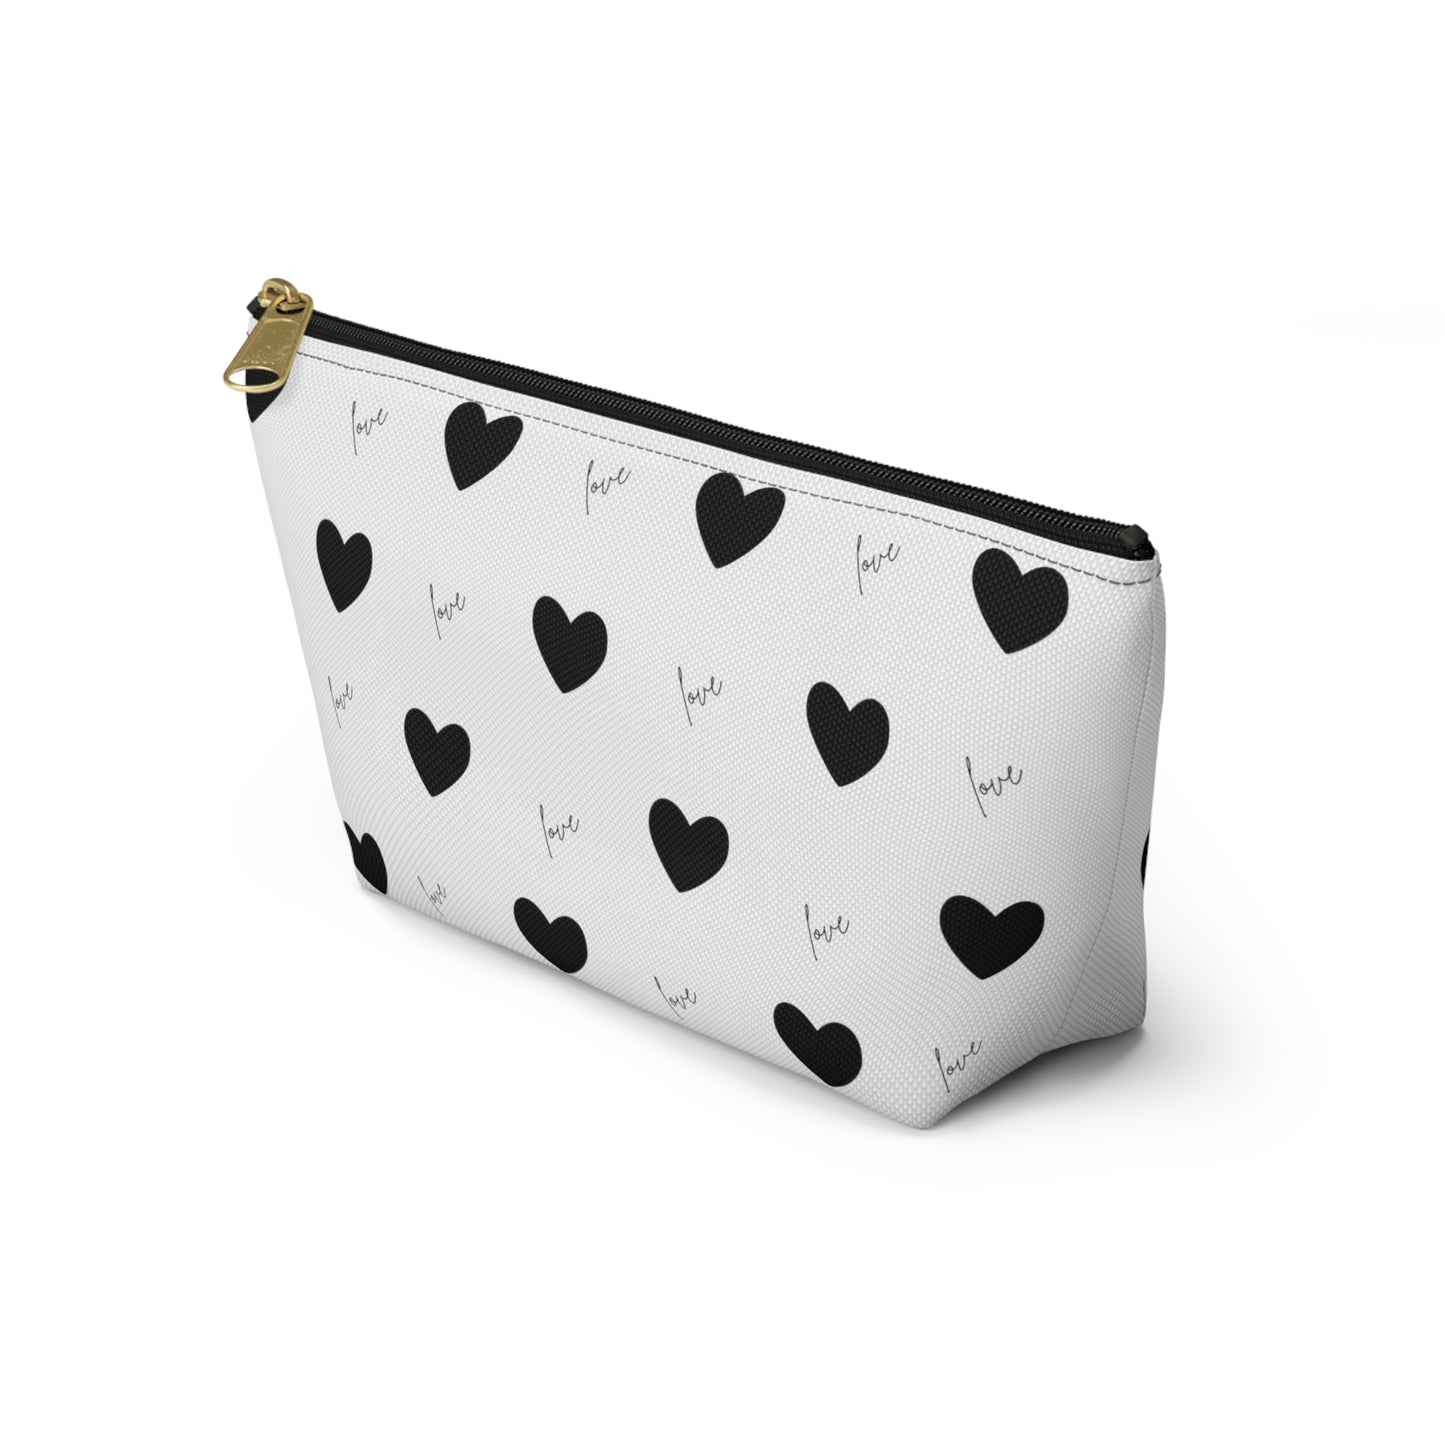 For The Love of Hearts Black Accessory Pouch w T-bottom